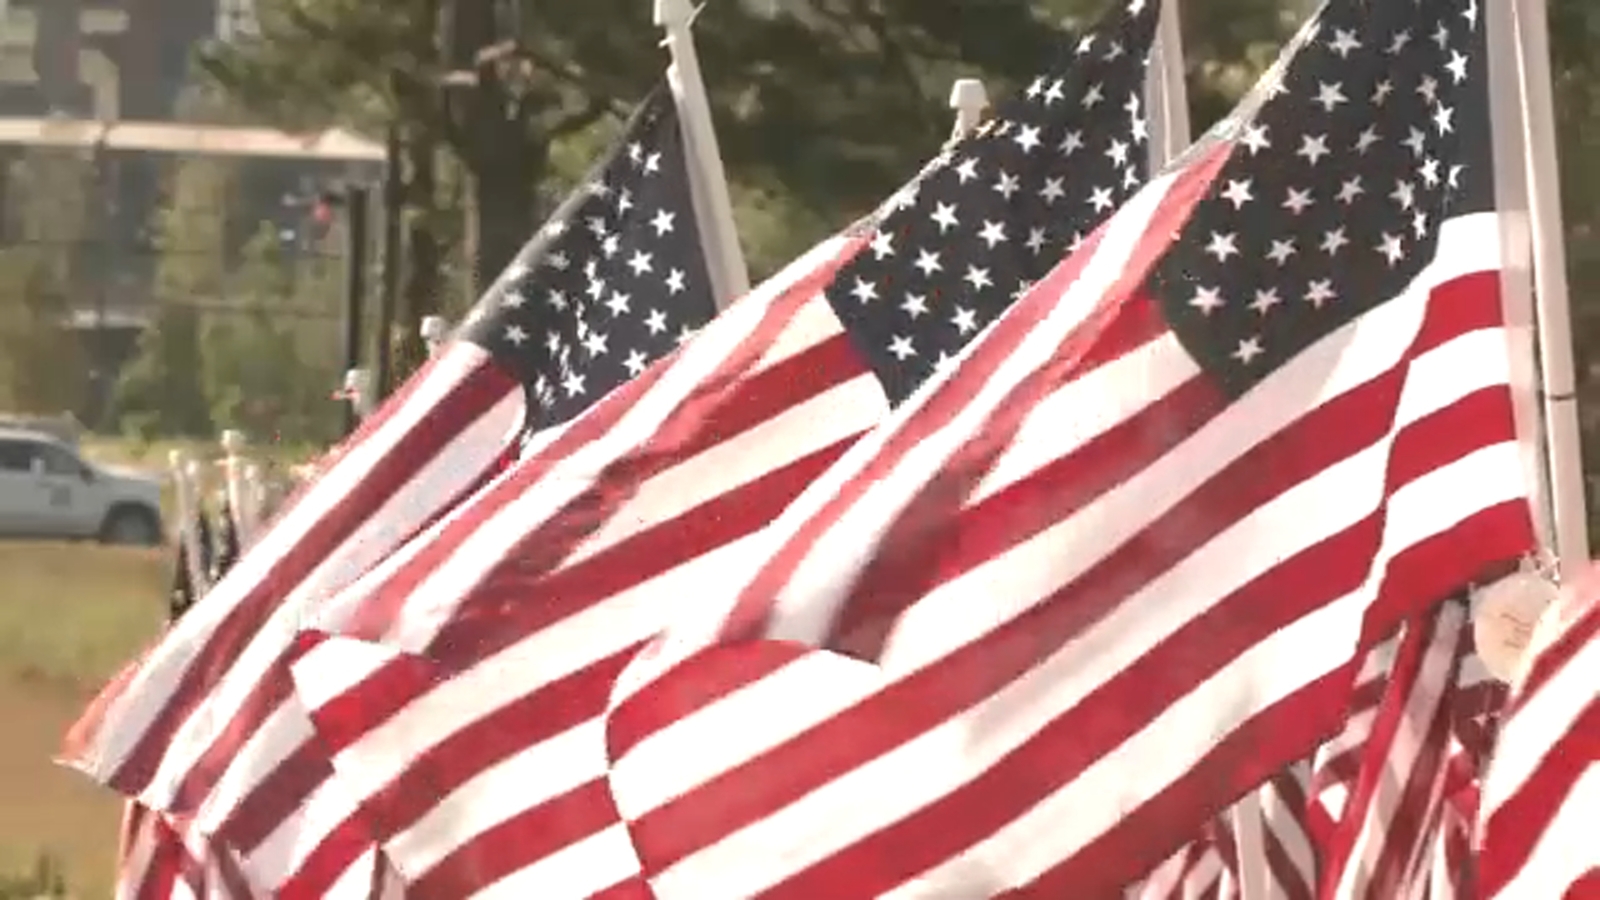 NC heroes | Durham’s Flags for Heroes honors veterans, first responders, officers, EMS for their service, sacrifice [Video]